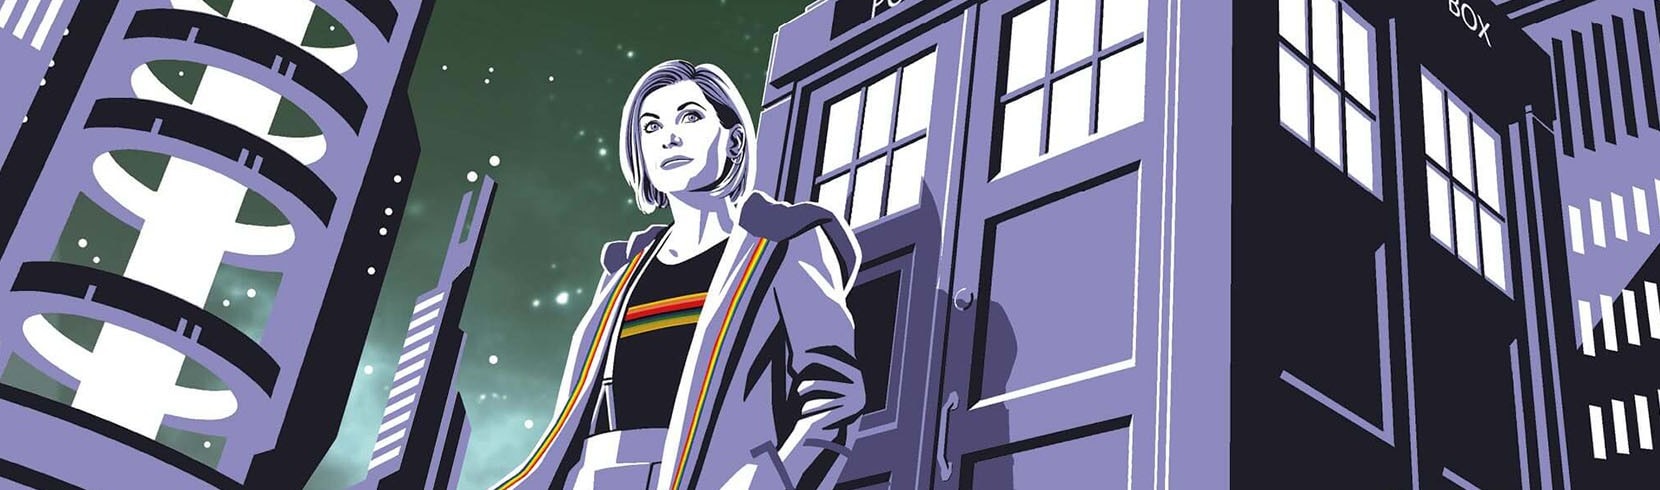 ComicsPRO 2019 DOCTOR WHO 13TH DOCTOR #1 Babs Tarr Exclusive Variant 